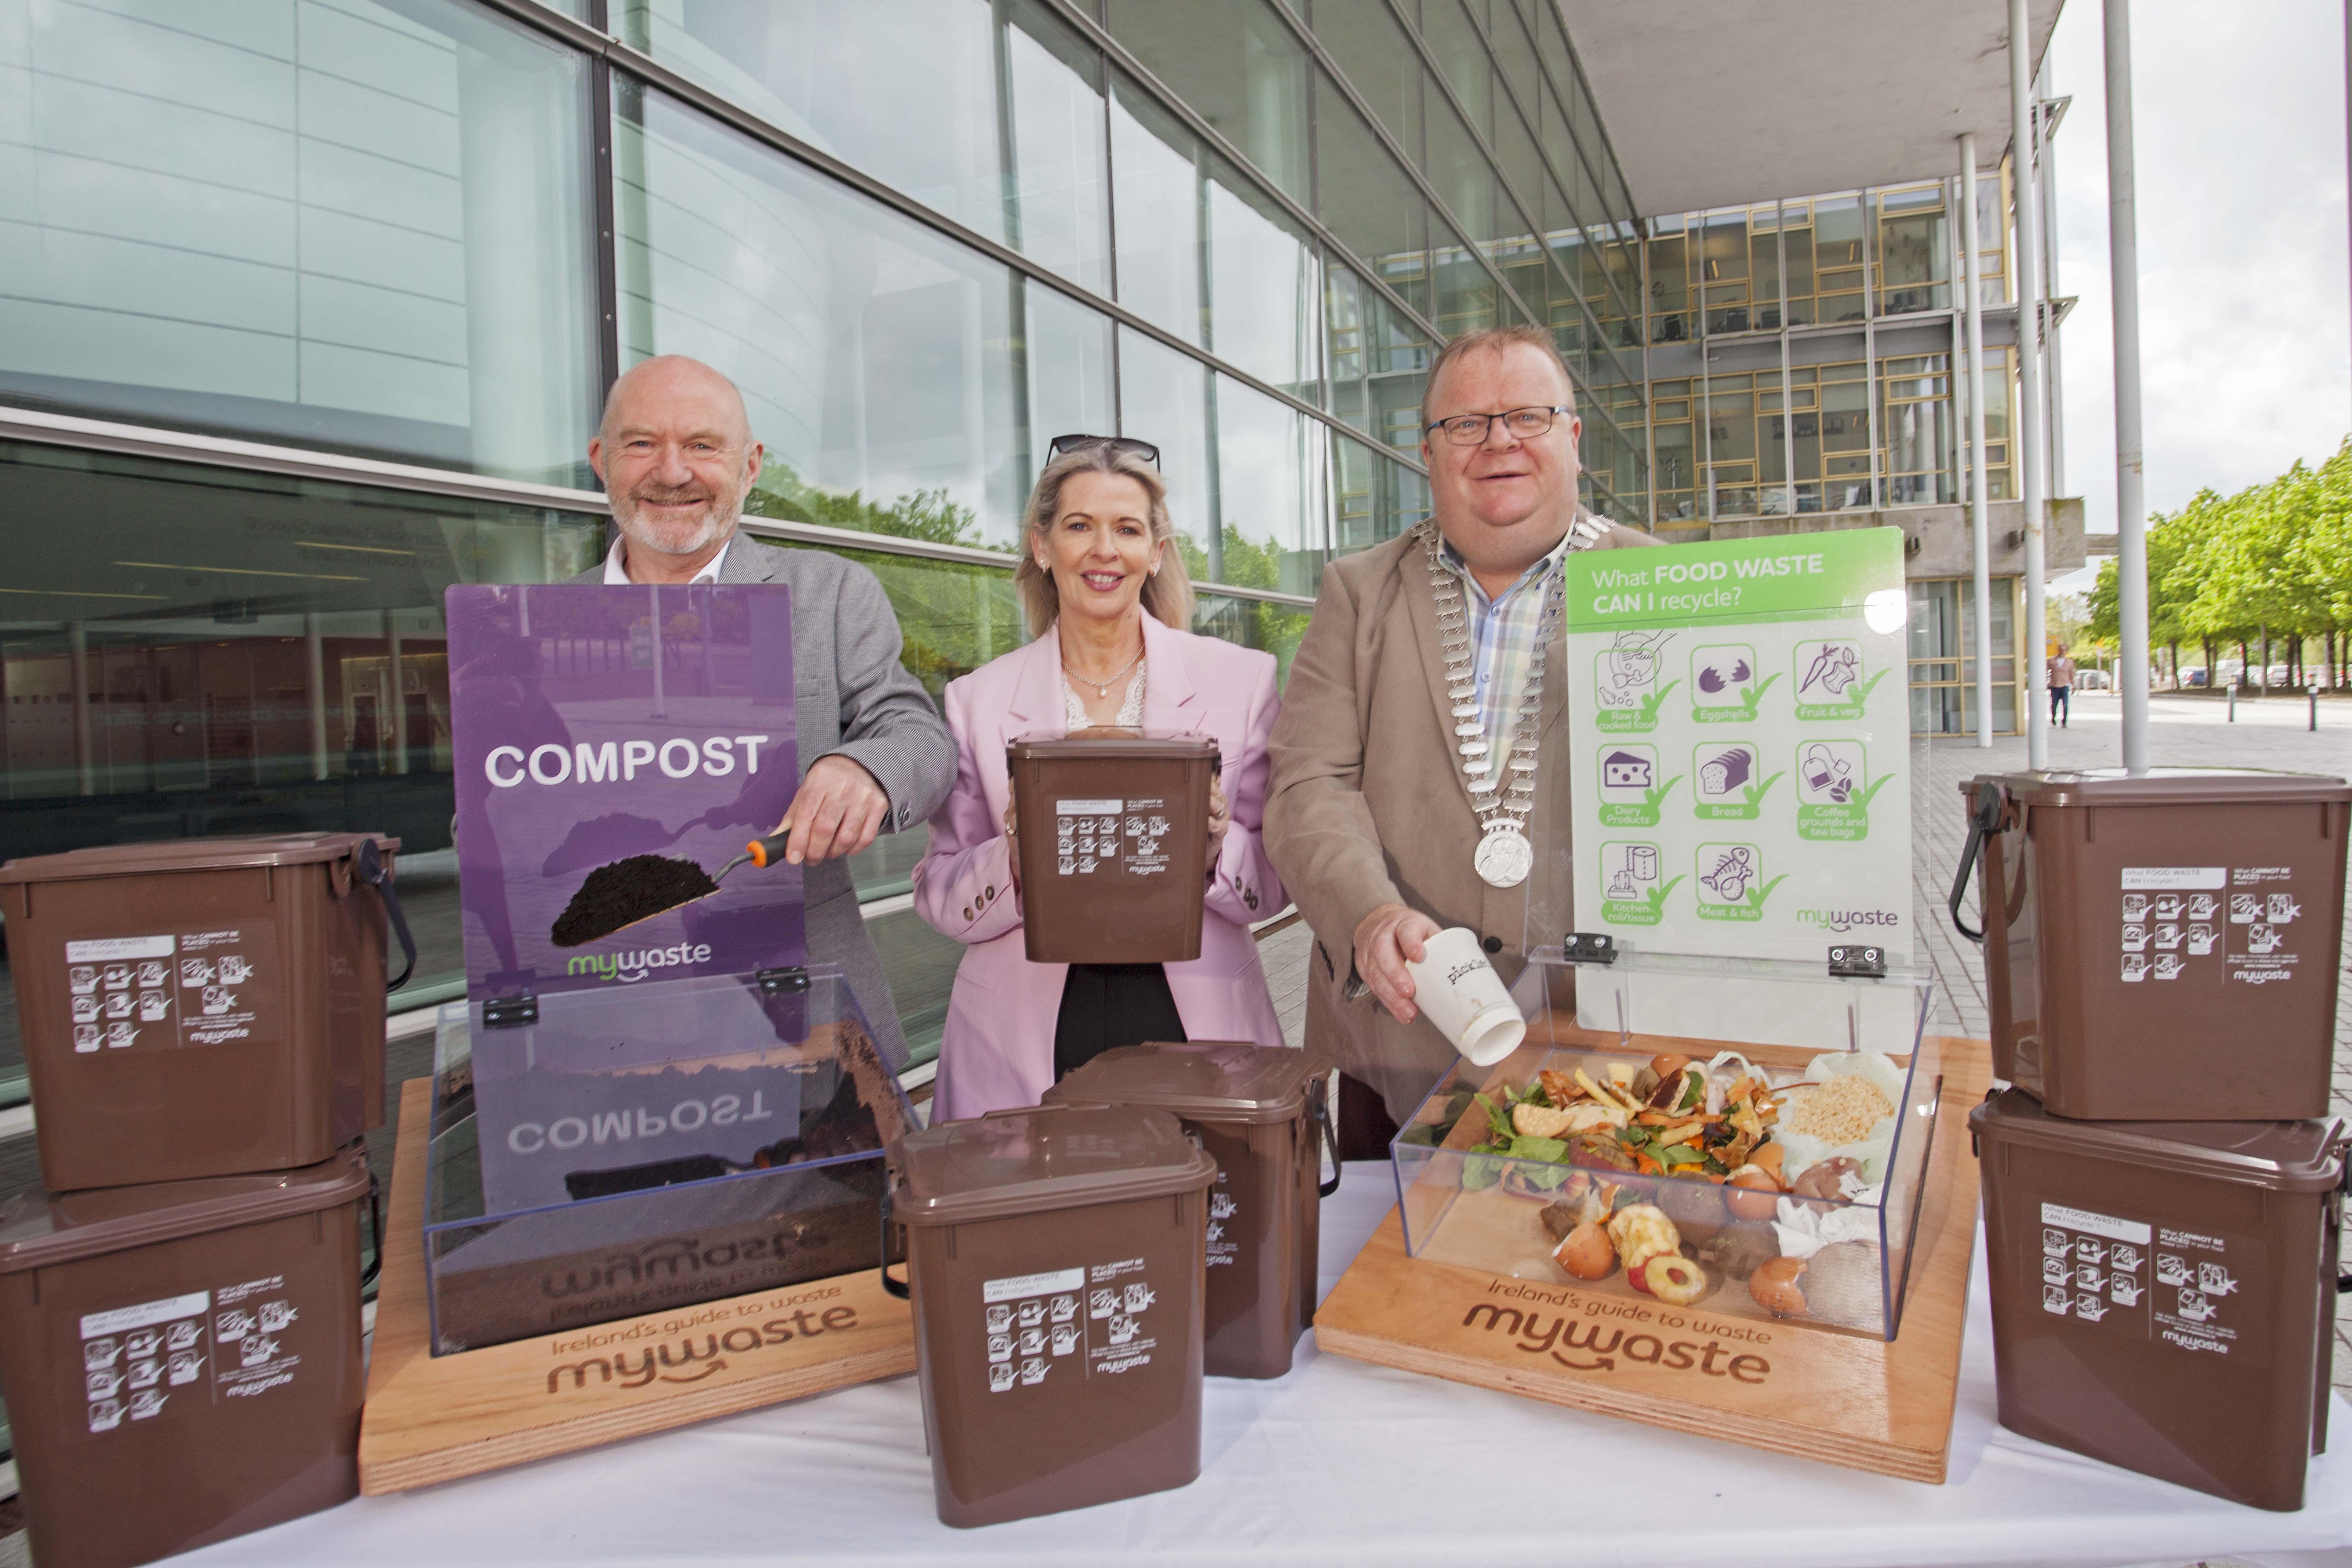 Food Waste Recycling Week in Cork County launch